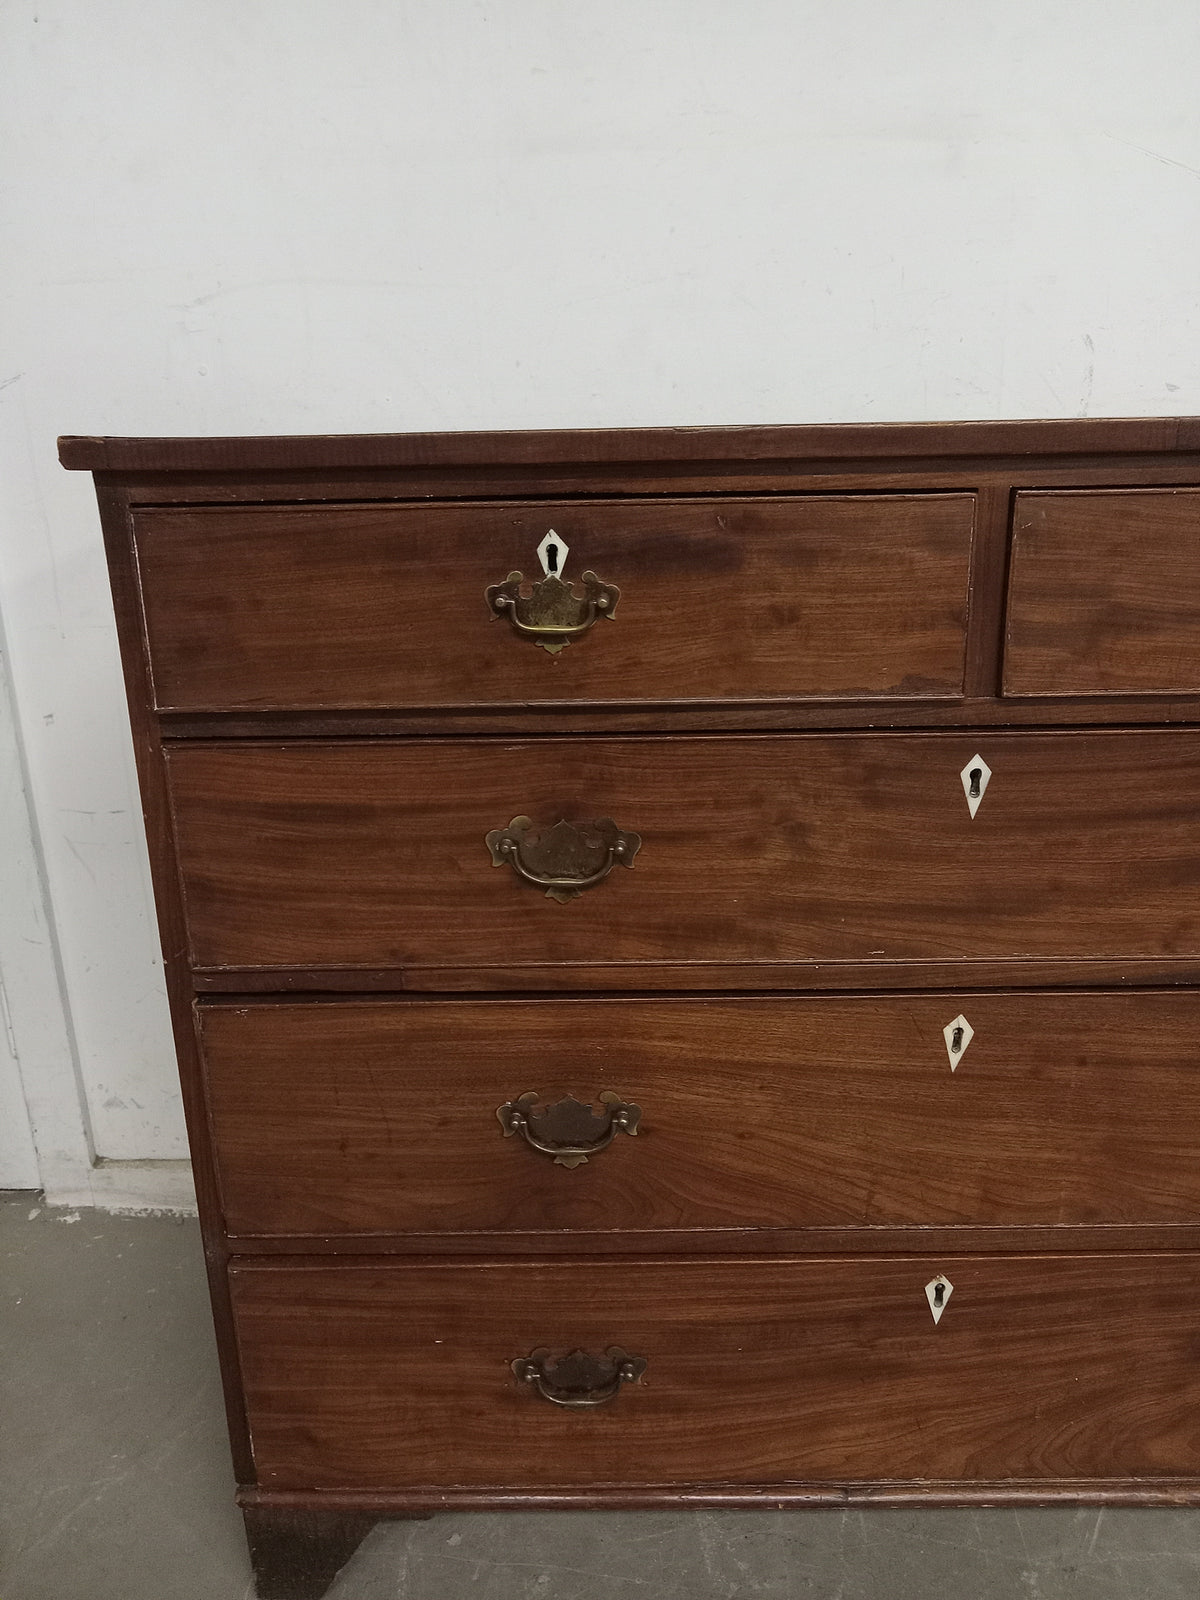 45"W Antique Mahogany Inlaid Chest of Drawers